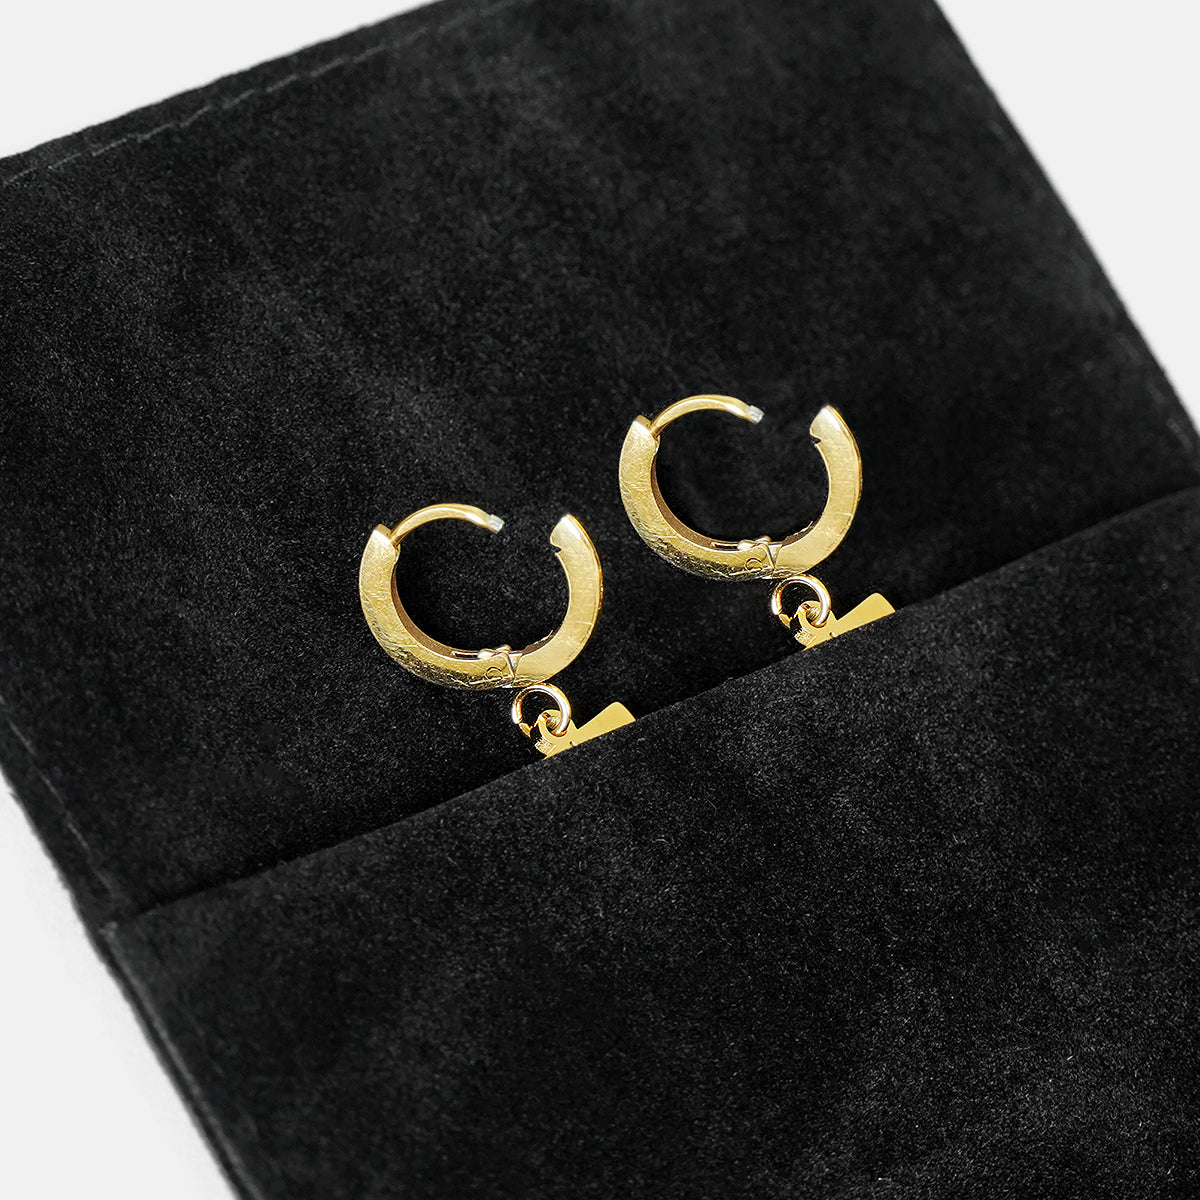 17 Number Earring - Gold Plated Stainless Steel